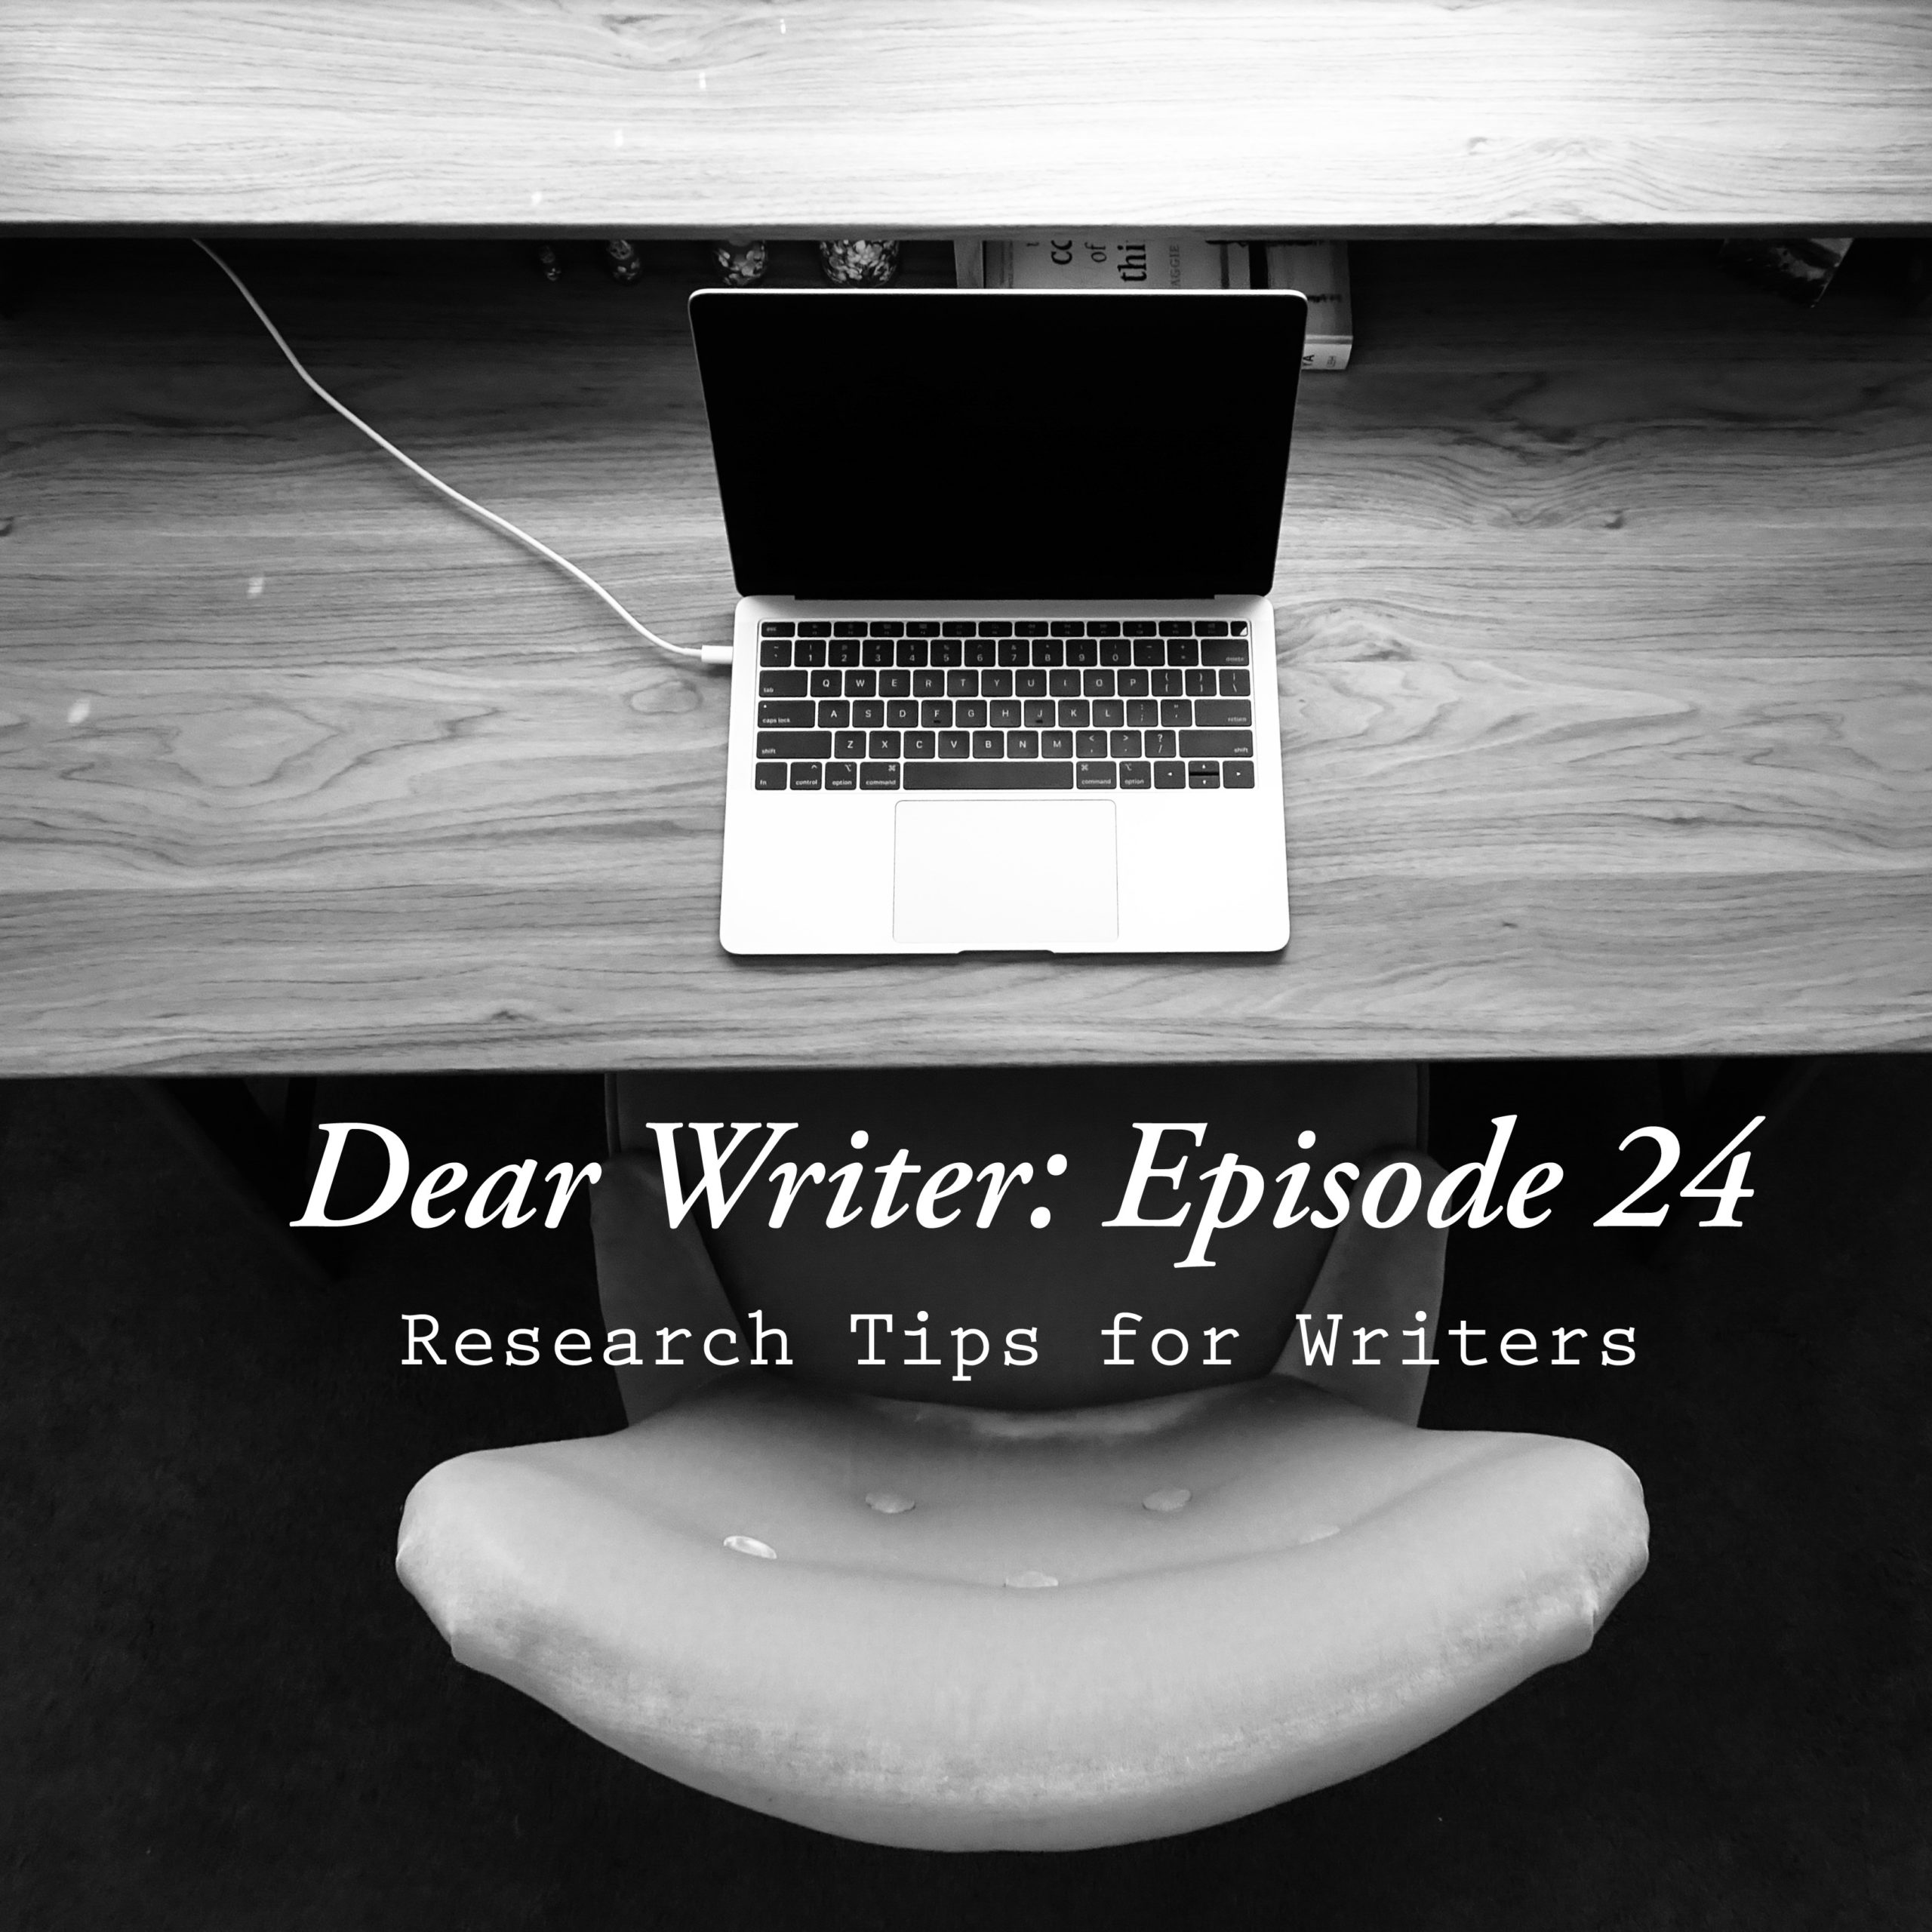 Dear Writer: Episode 24 - Research Tips for Writers